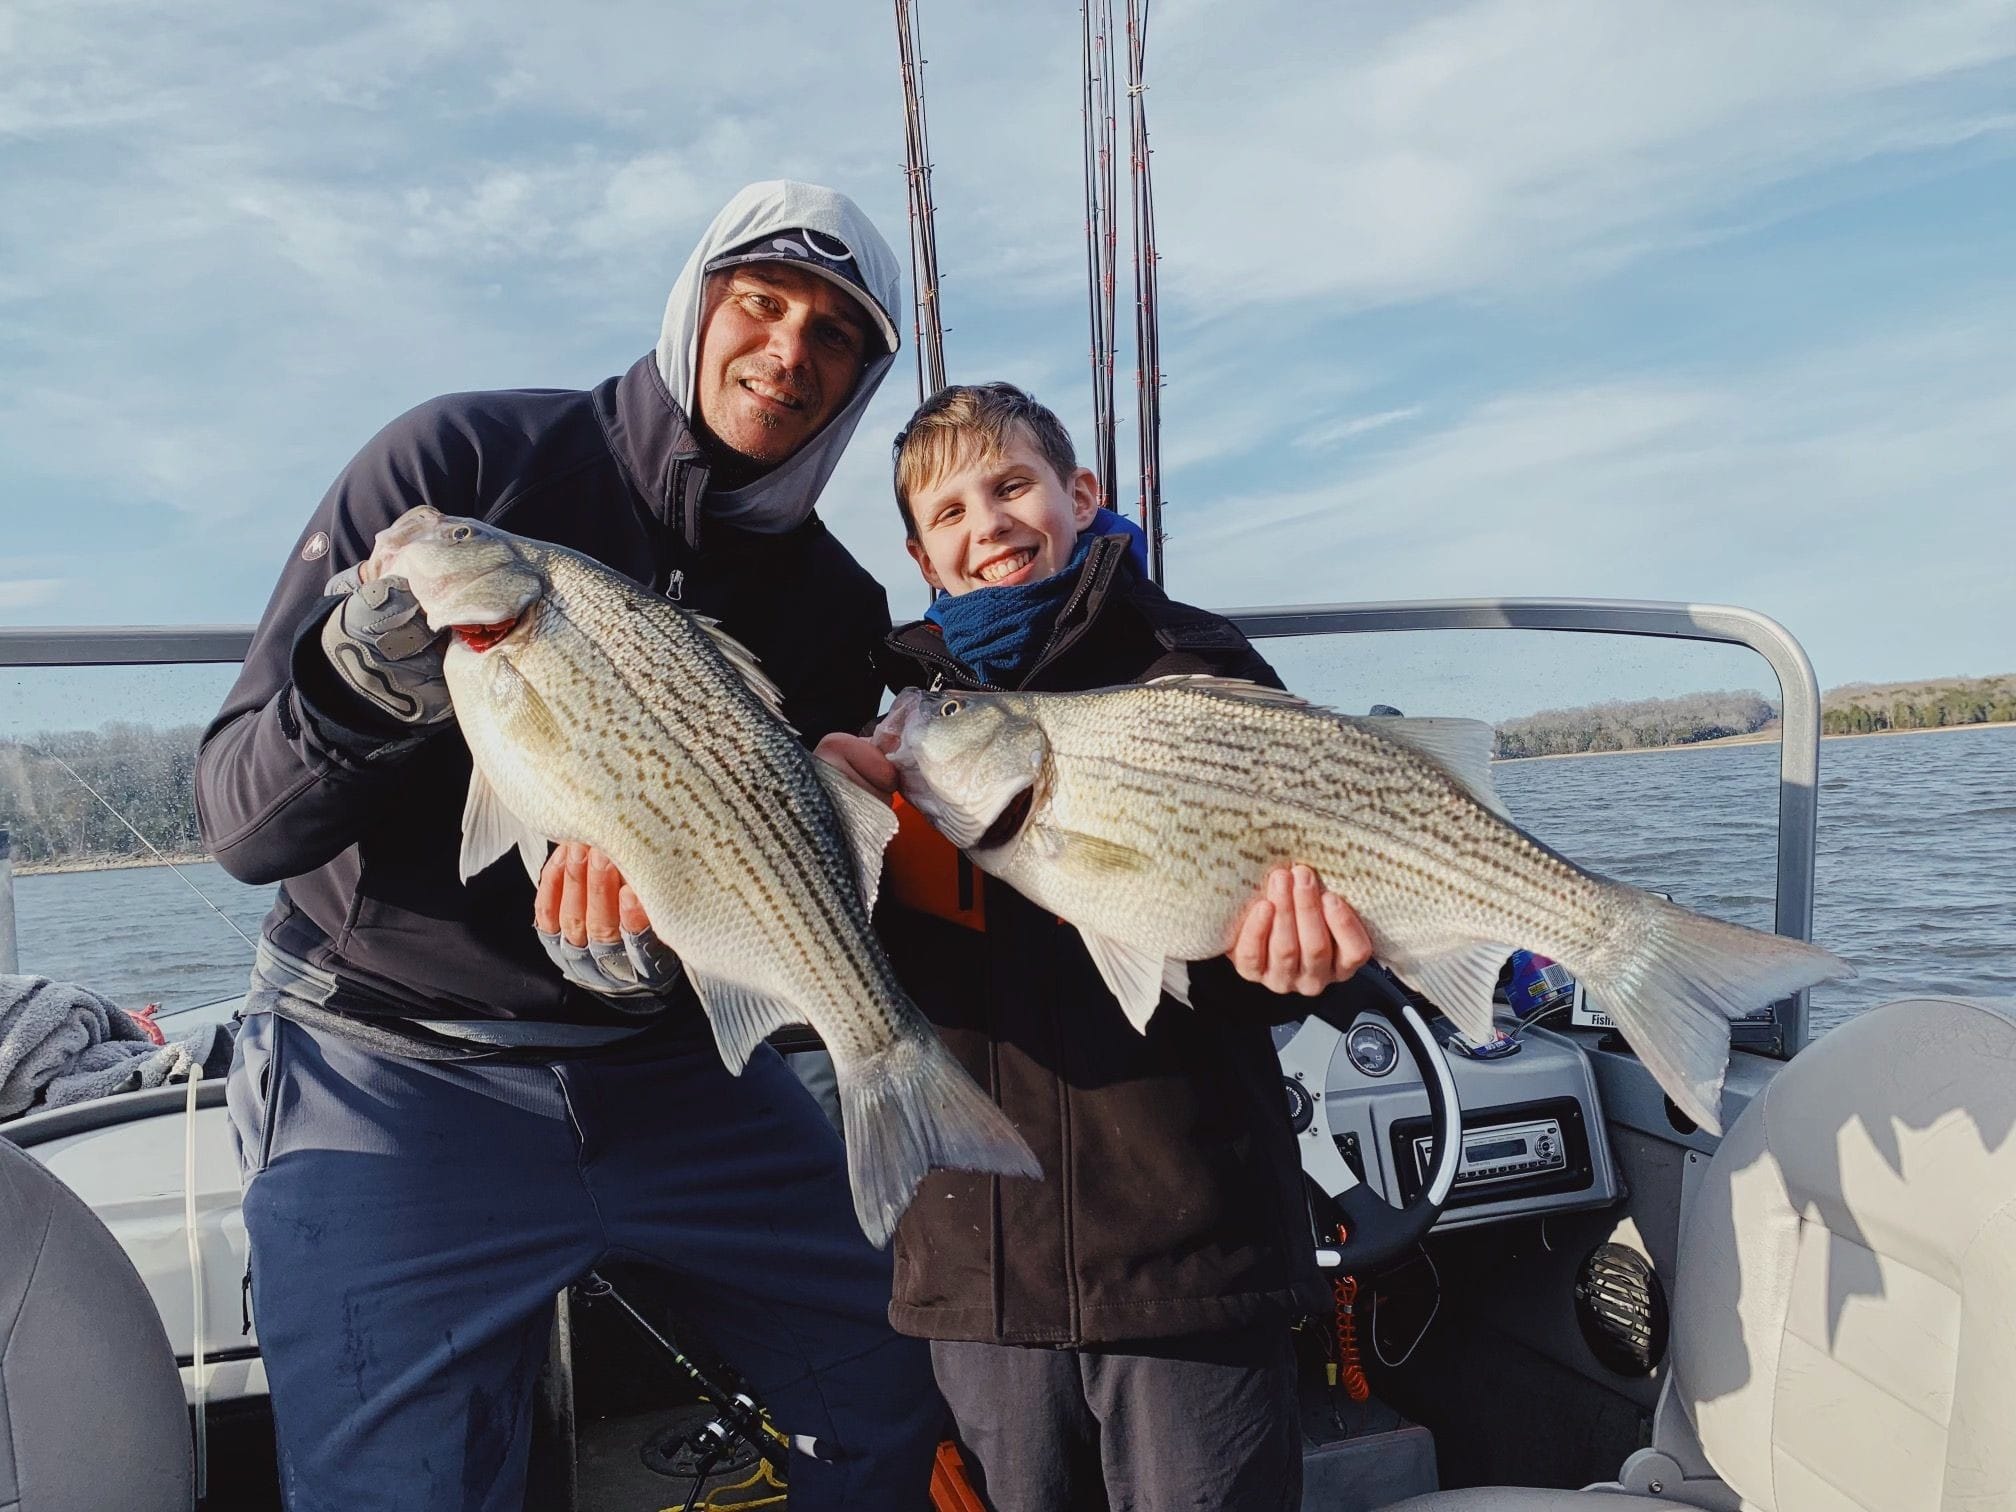 NASHVILLE FISHING CHARTERS AND FISHING GUIDE SERVICES